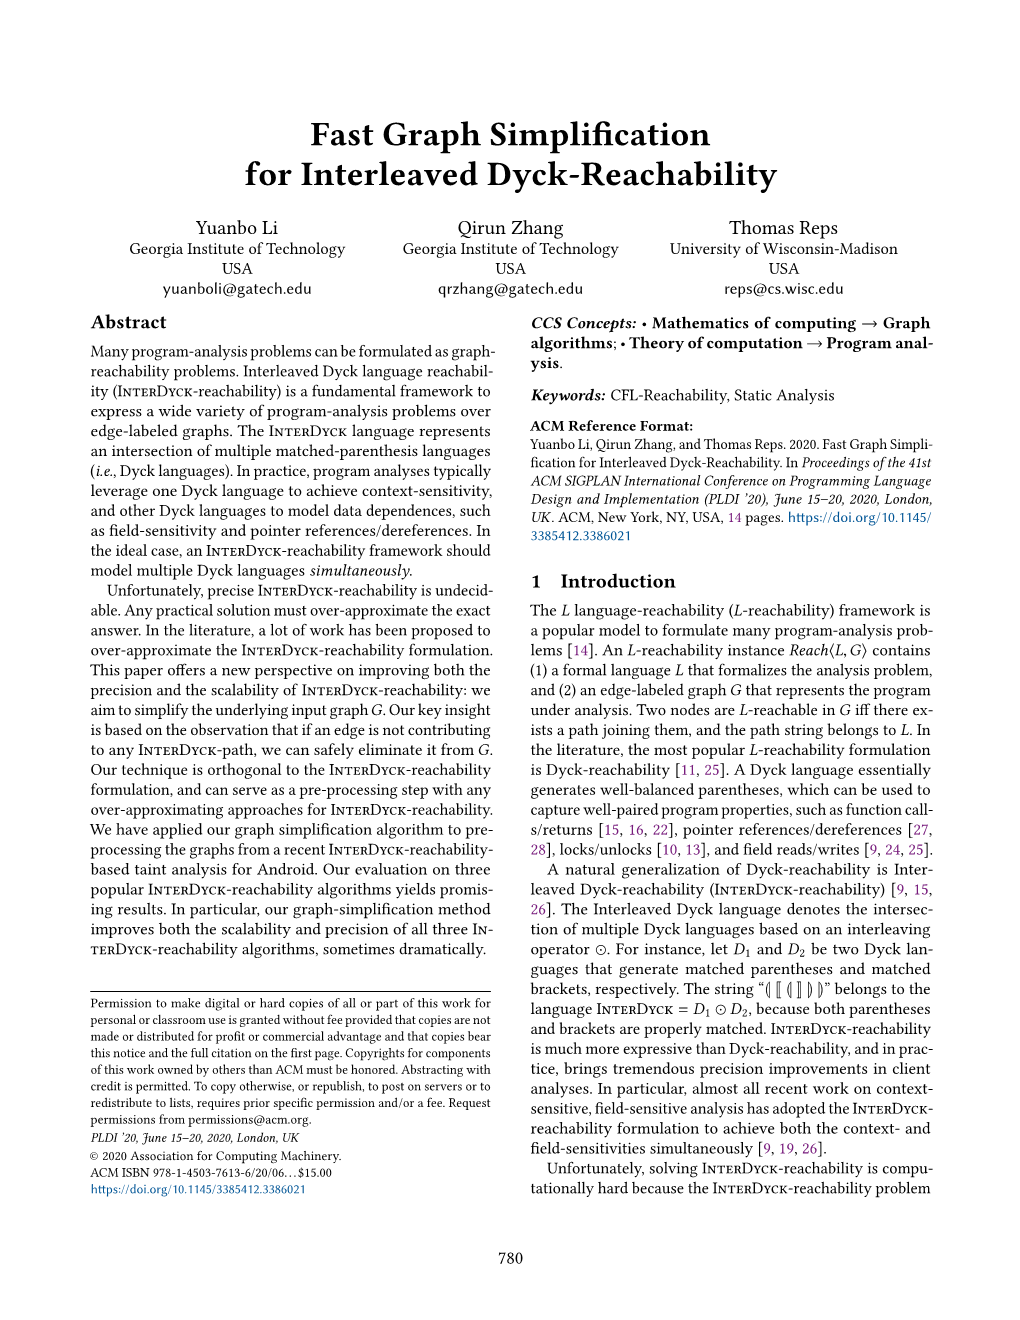 Fast Graph Simplification for Interleaved Dyck-Reachability